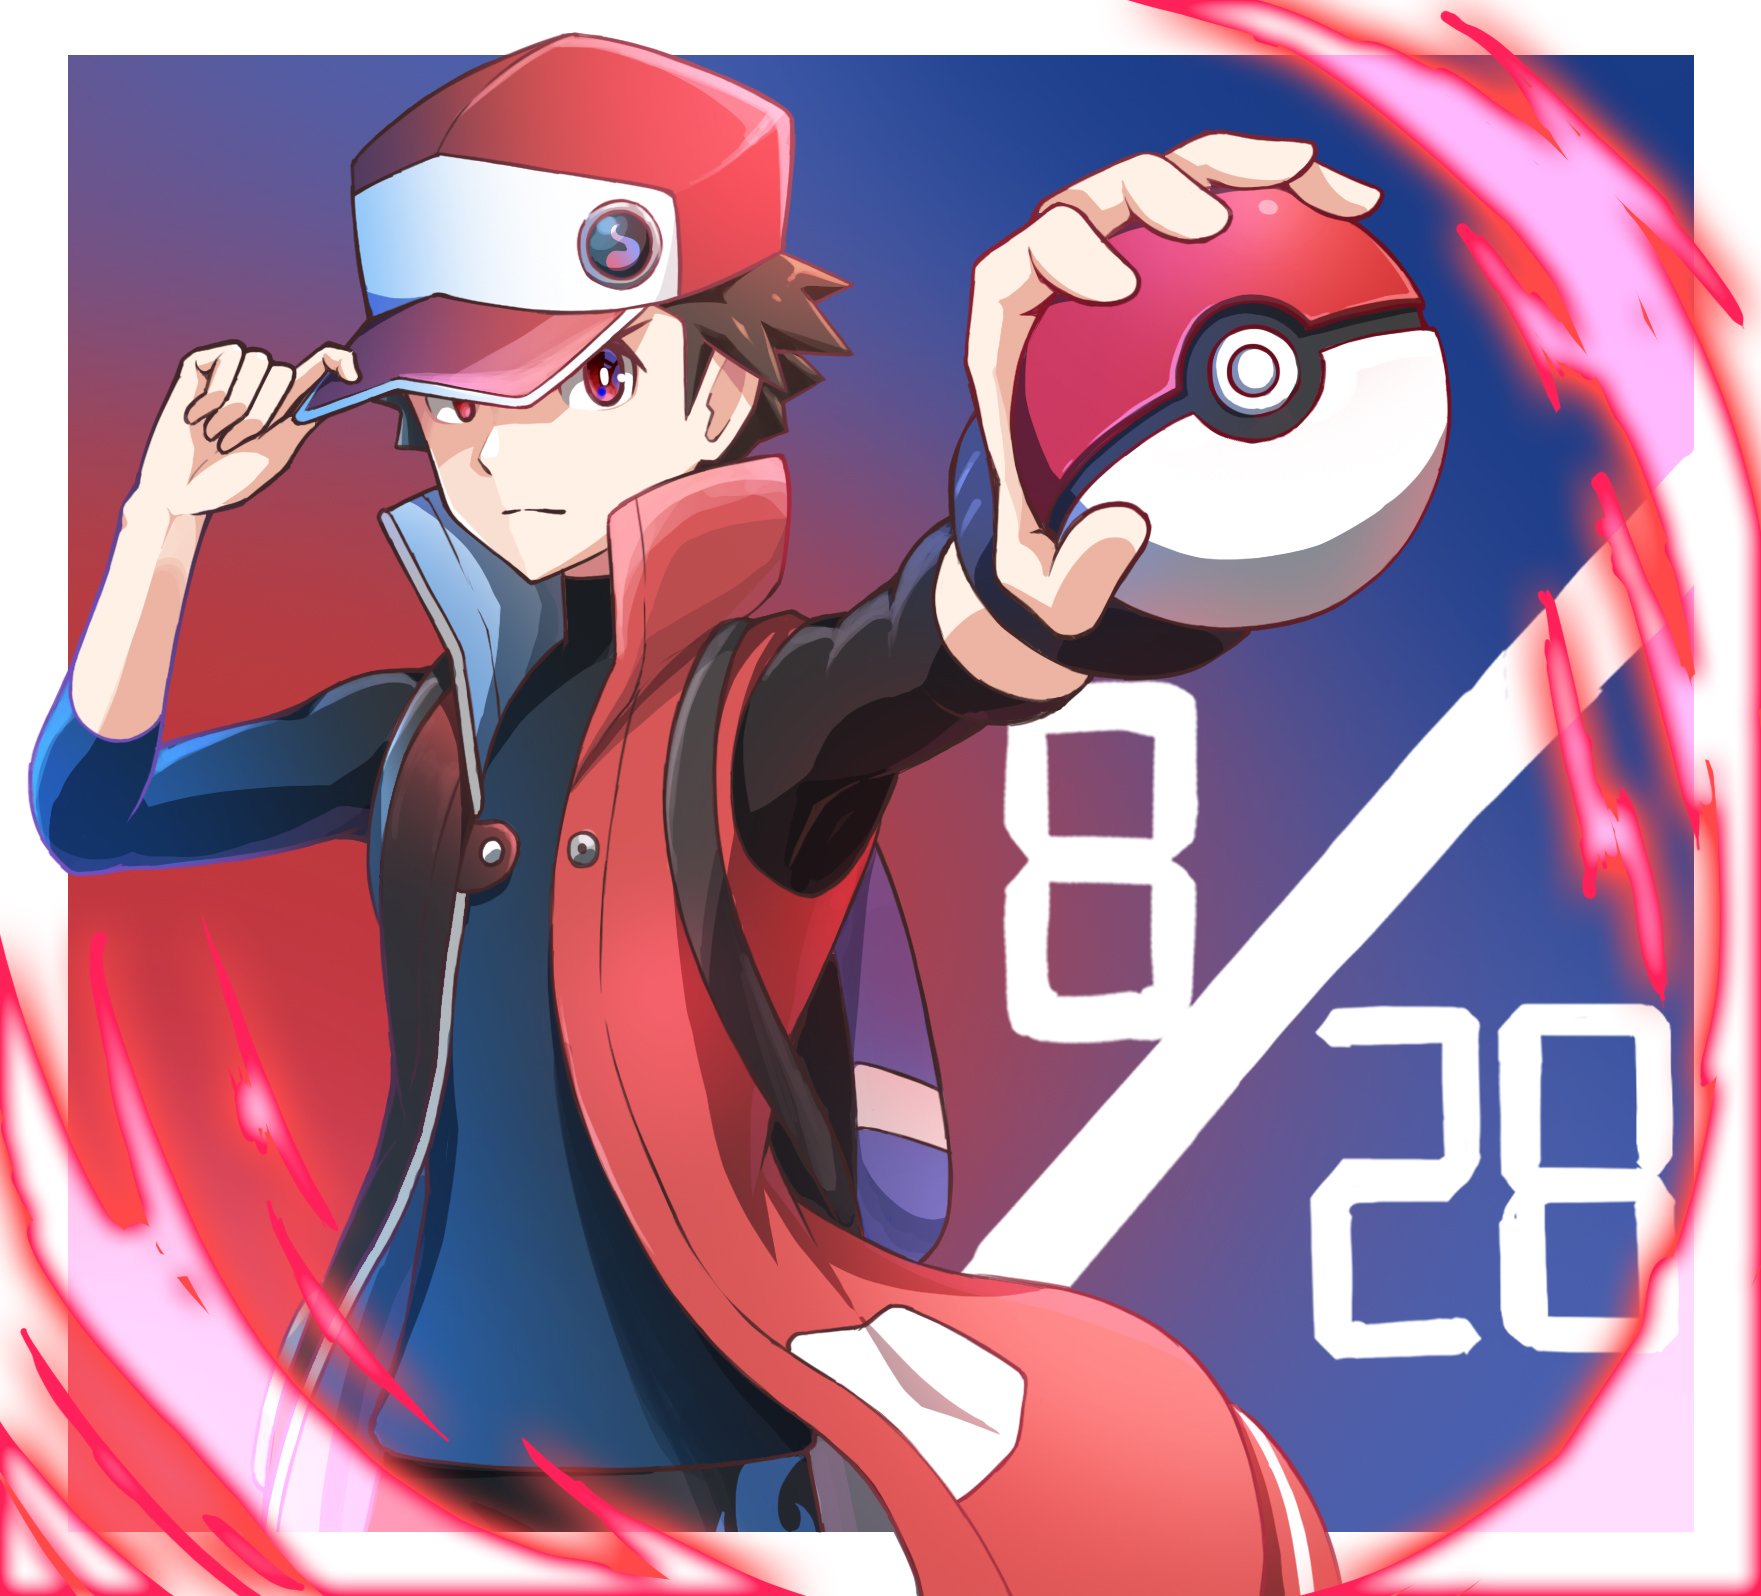 Red Icon - Red The Pokemon Master Icon (35348385) - Fanpop